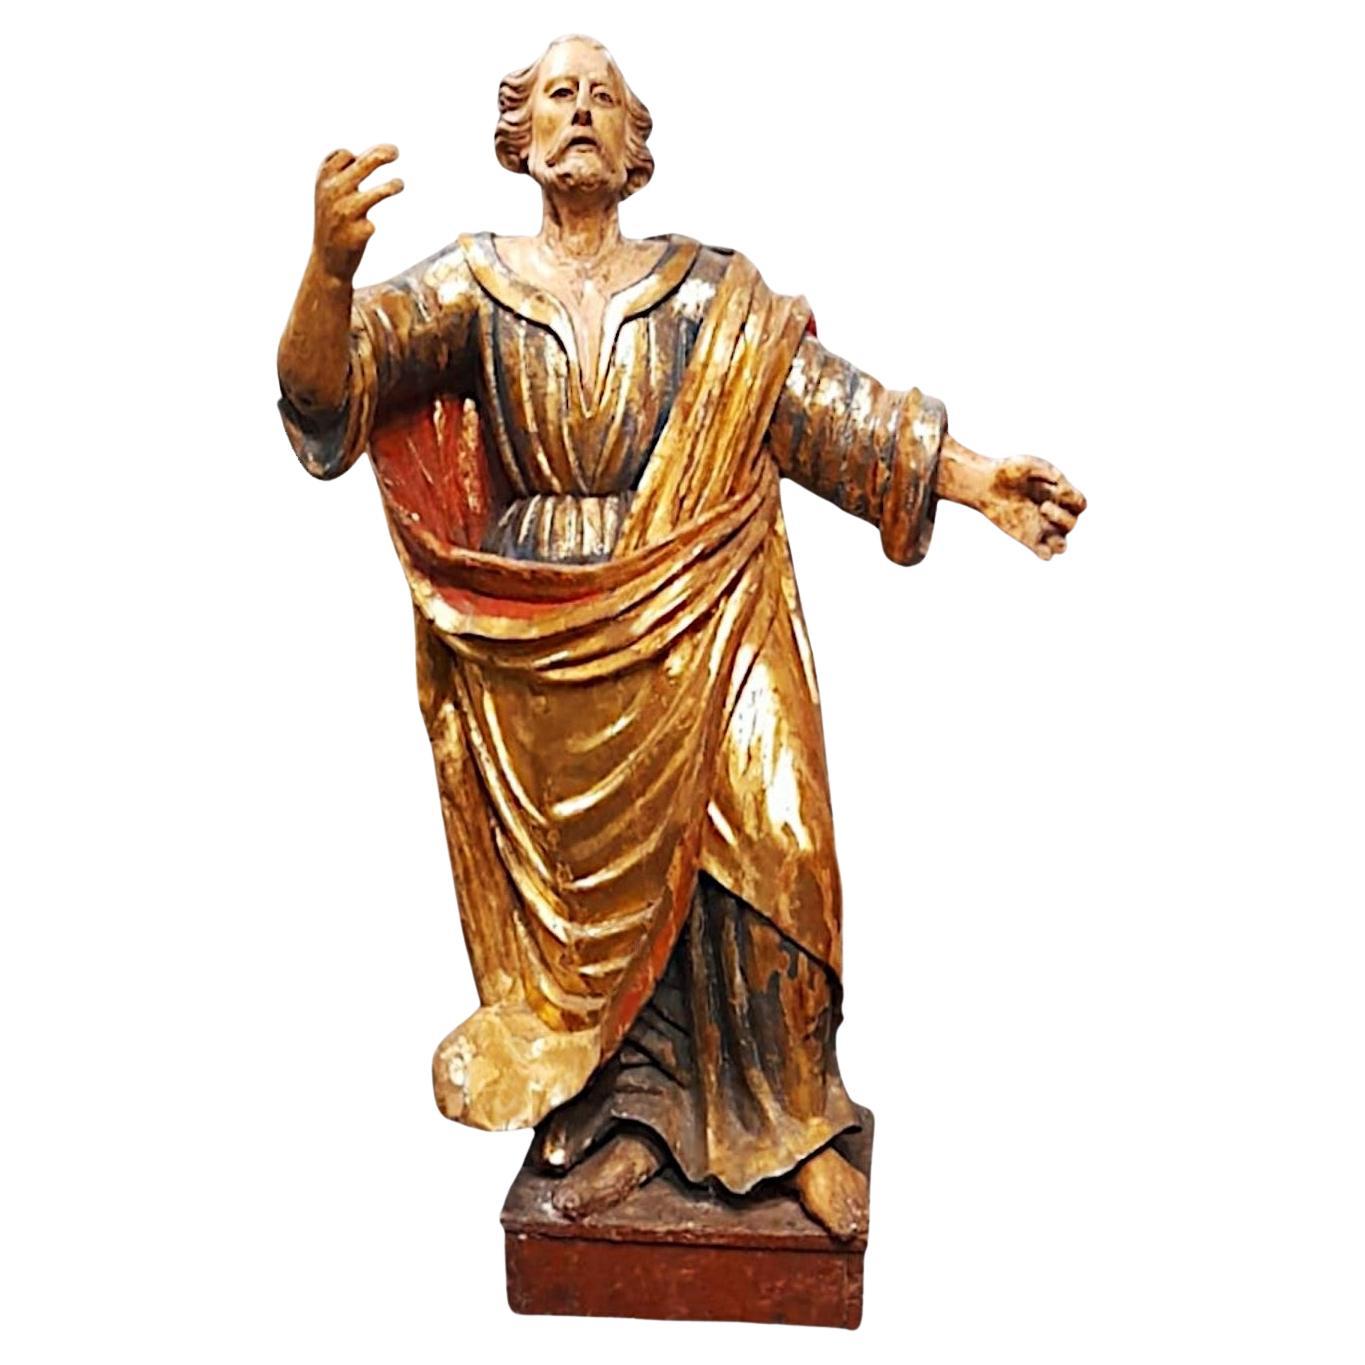 Large Venetian sculpture depicting Saint Paul, from the 1600s, carved in Walnut